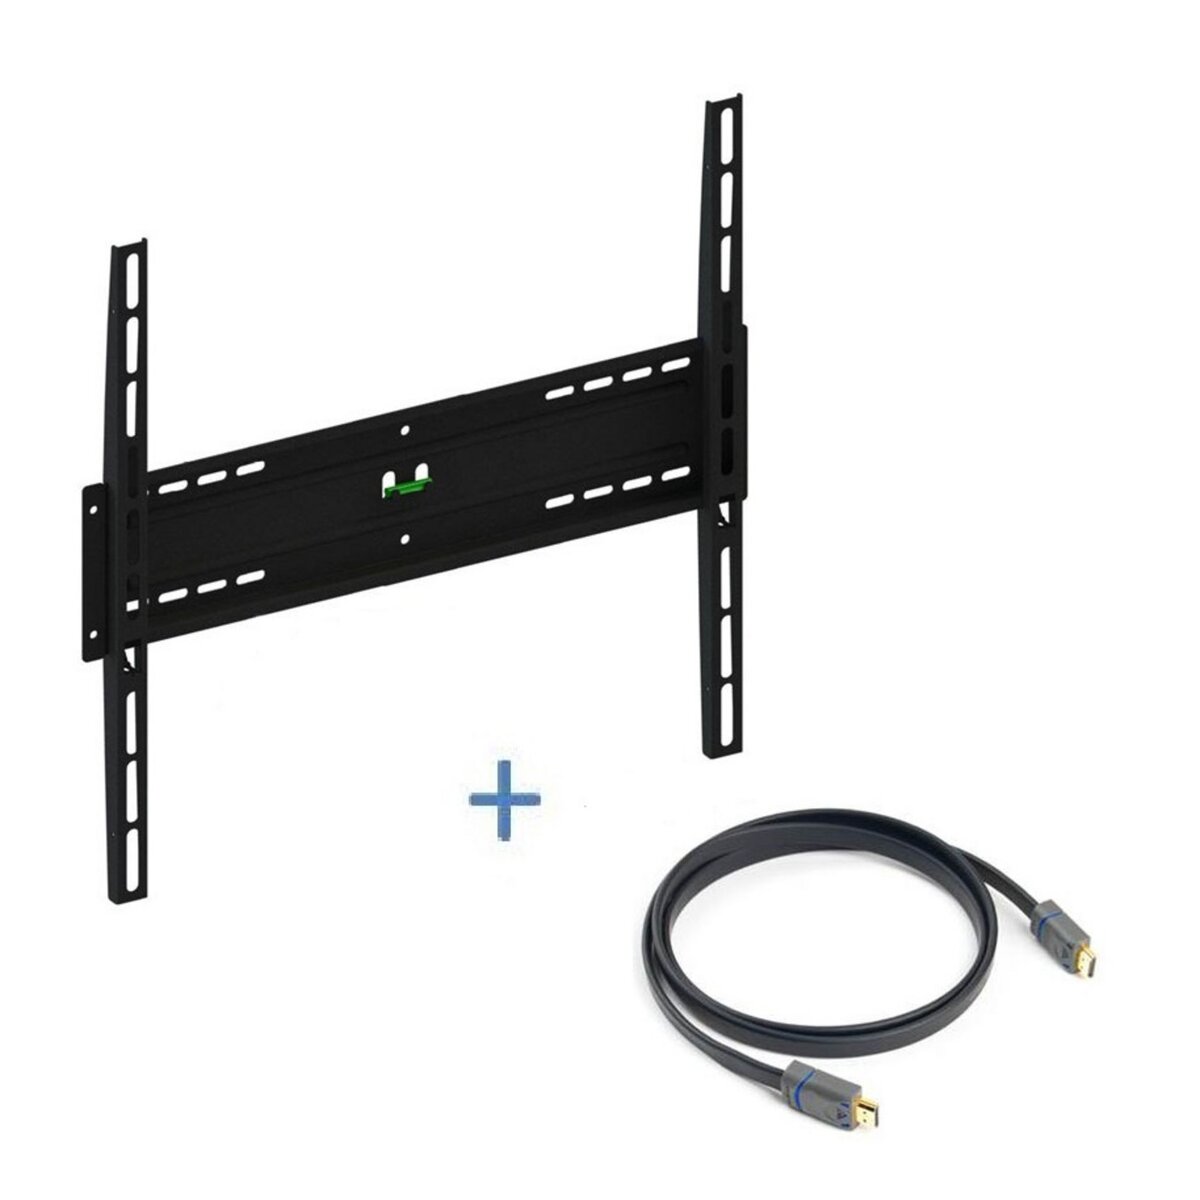 MELICONI Kit 1 support fixe + câble HDMI - Support mural